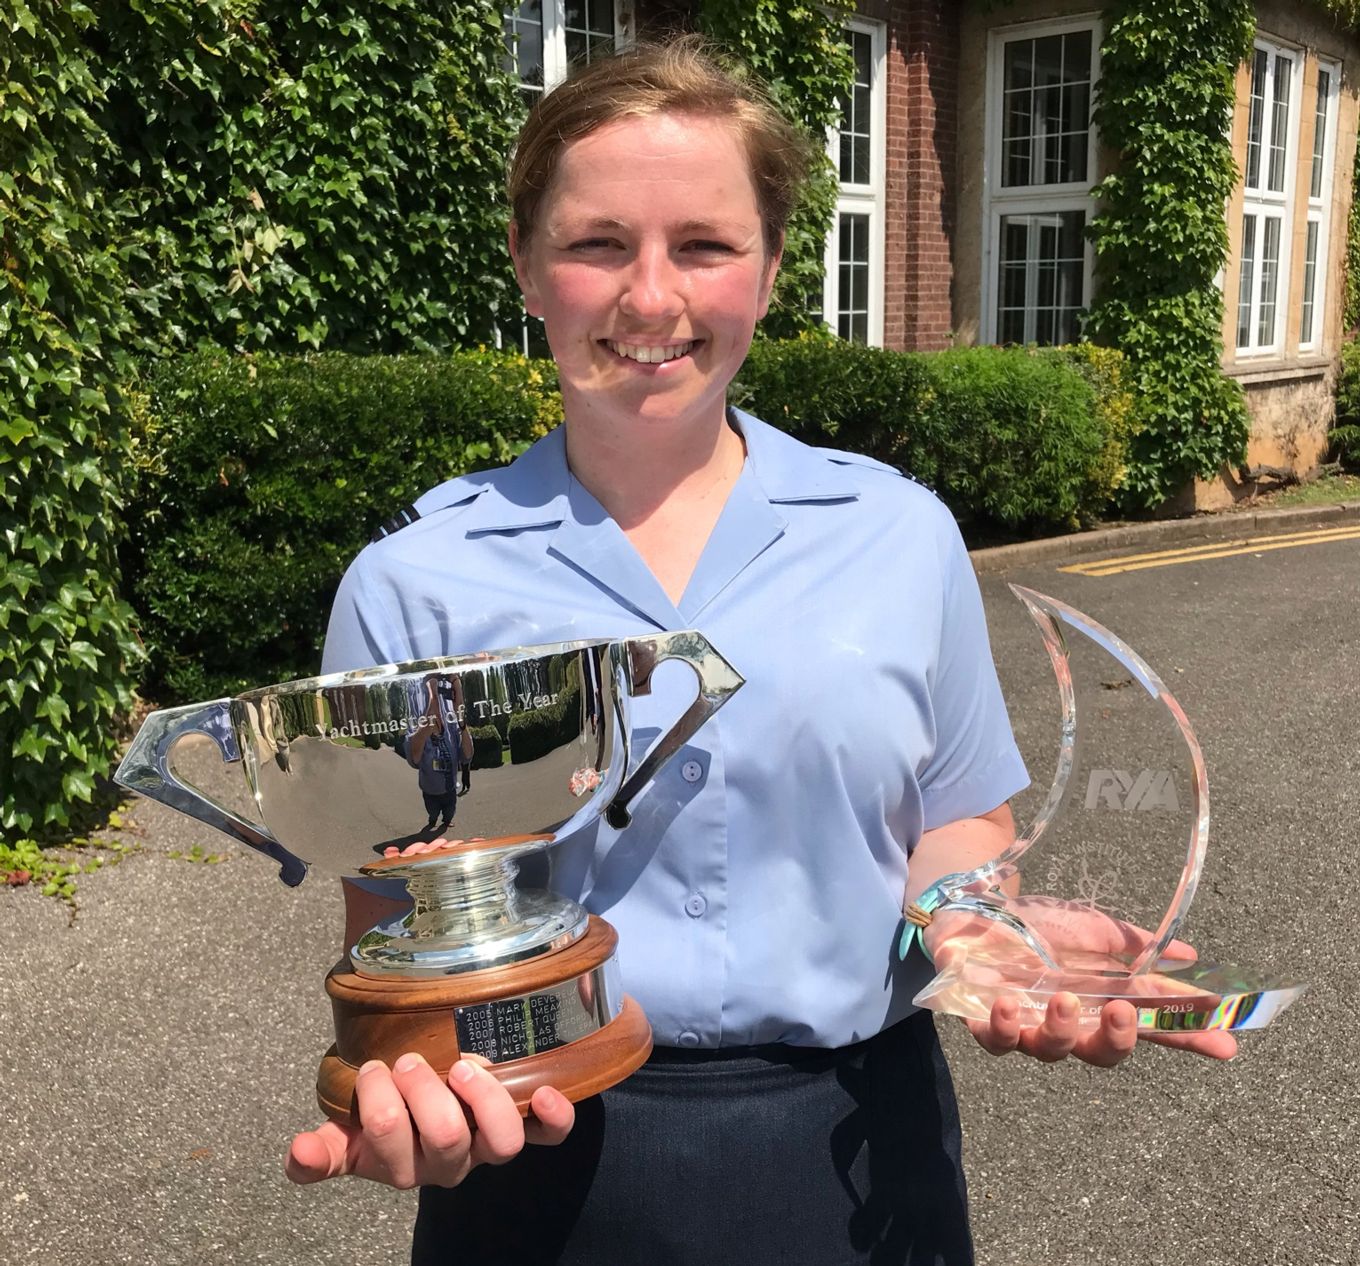 Flight Lieutenant Danielle Rowe with the official silver trophy and personal award